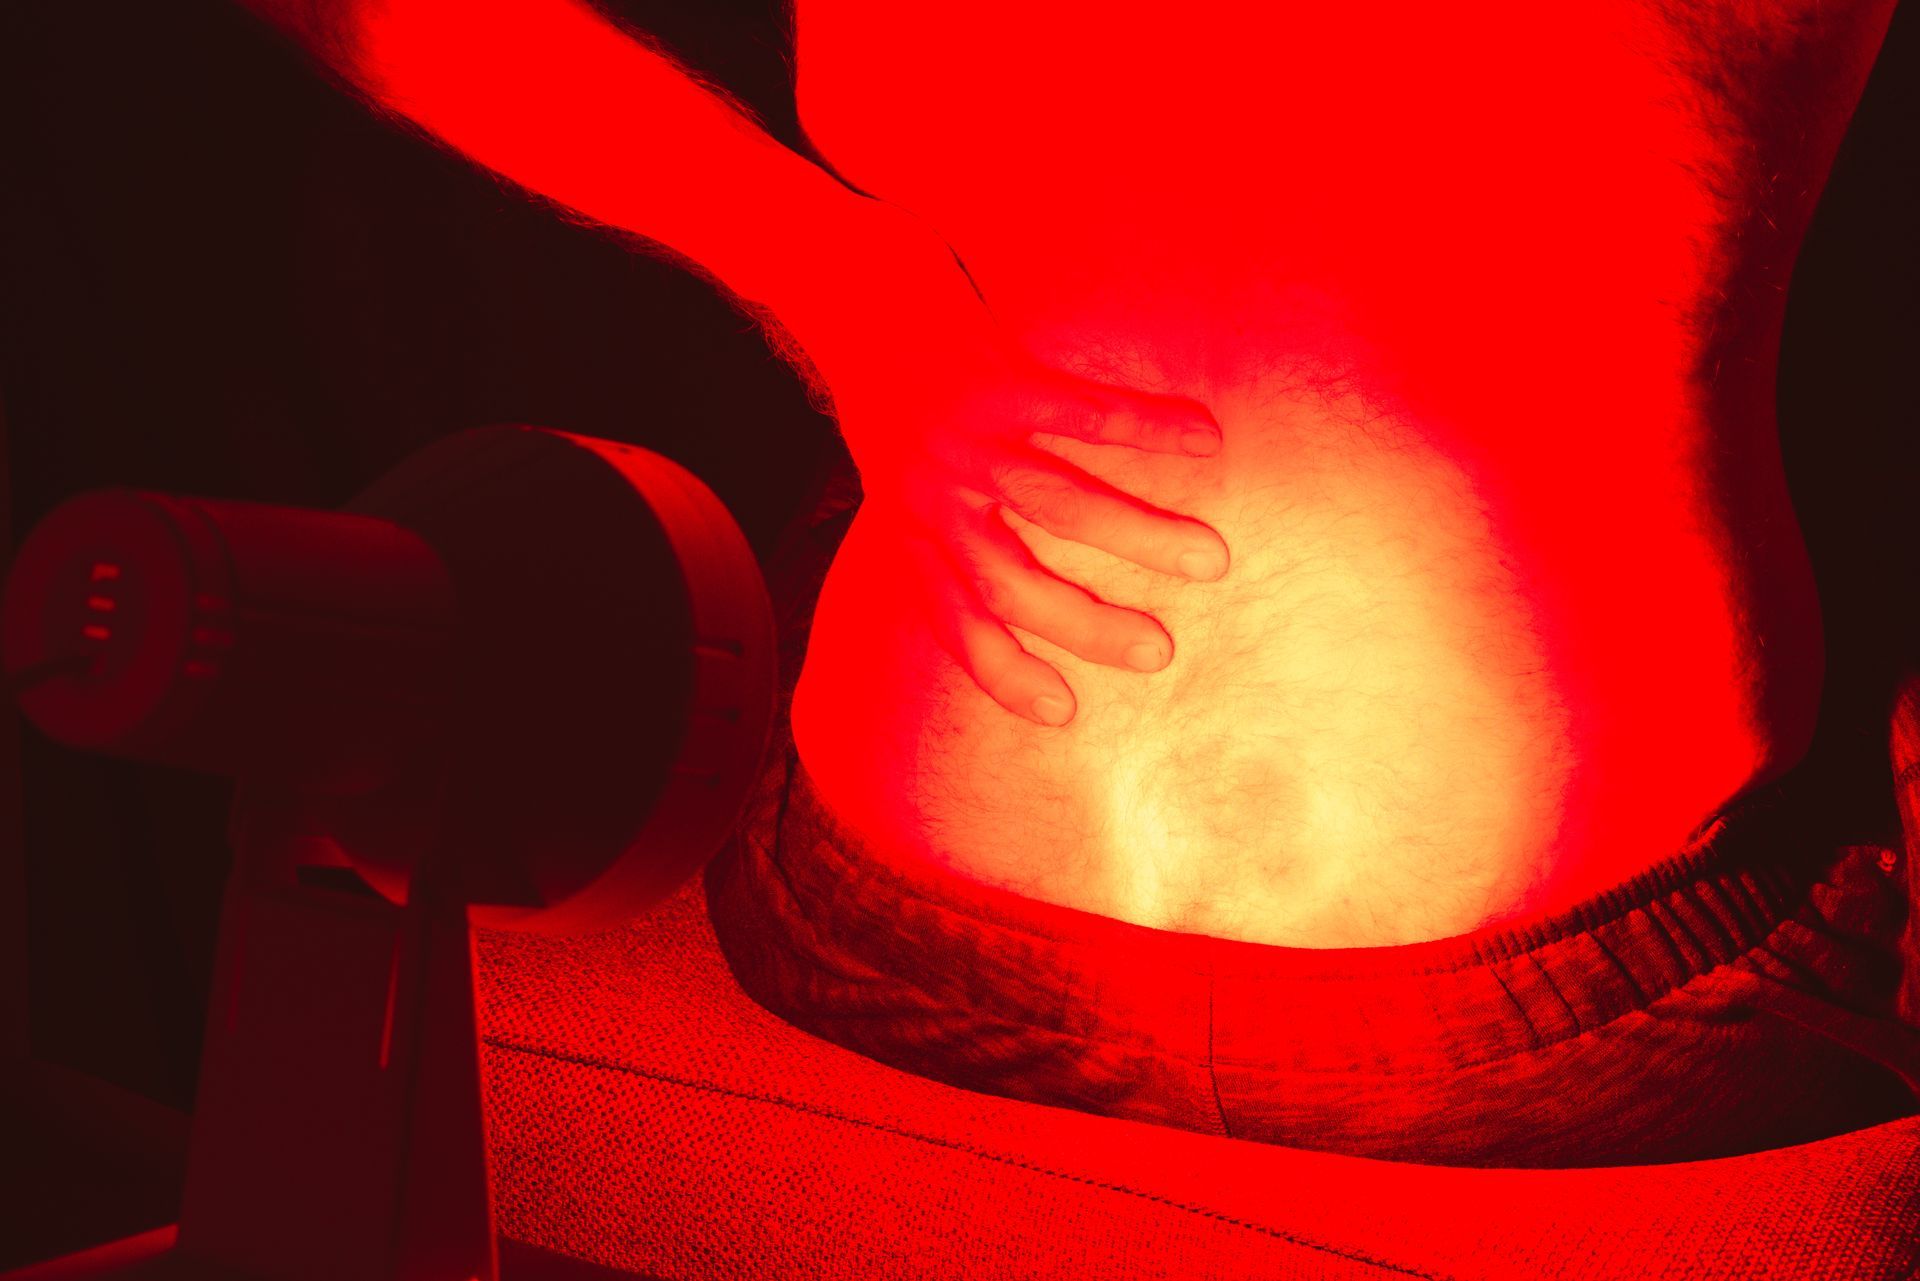 A person is sitting on a chair with a red light on their back.